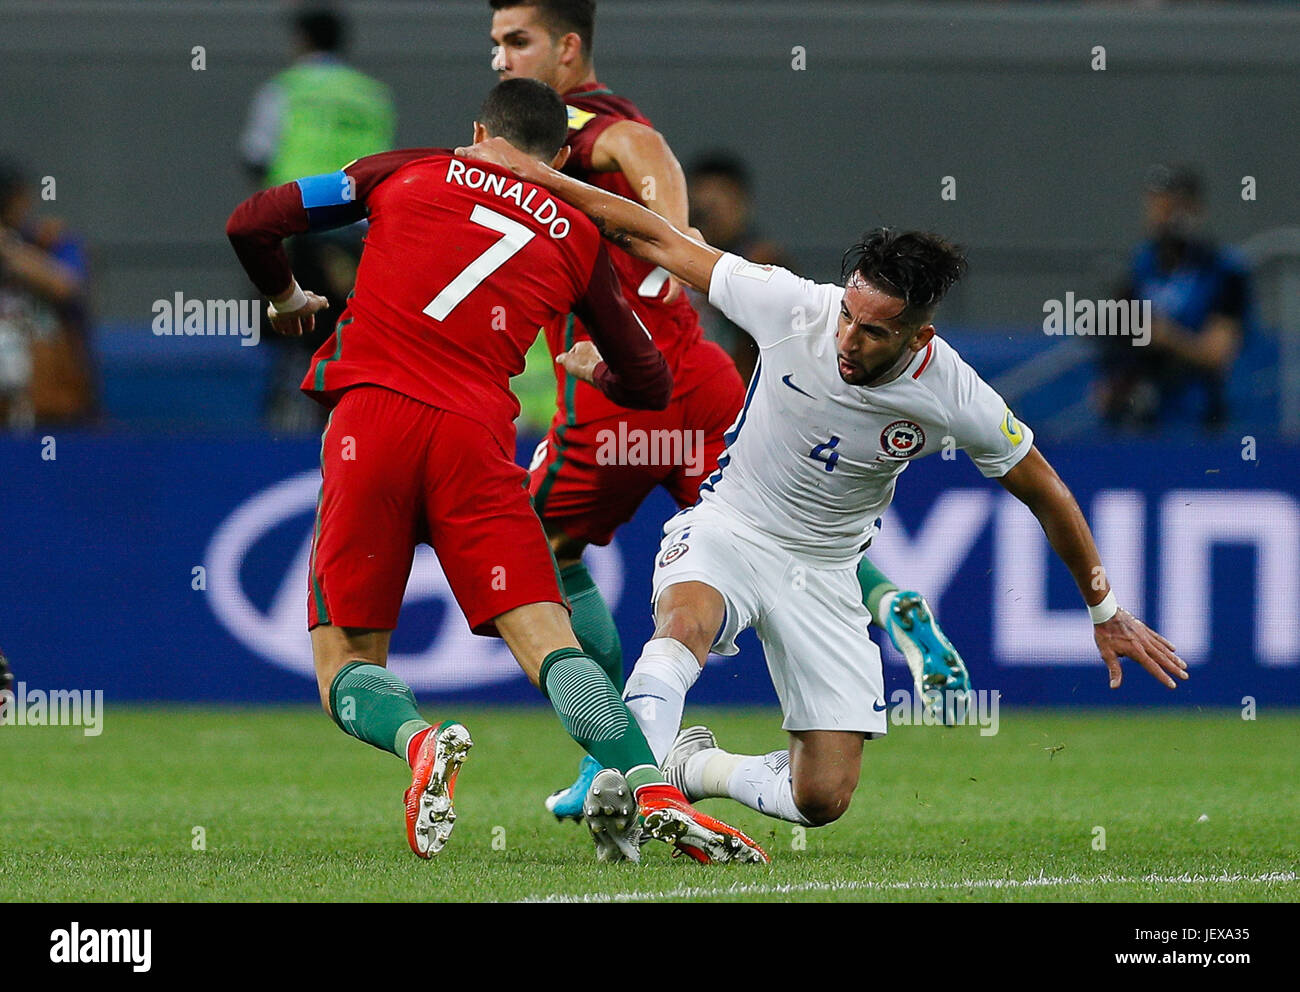 KAZAN, RT - 28.06.2017: PORTUGAL VS CHILE - ISLA Mauricio of Chile pulls CRISTIANO RONALDO from Portugal during a match between Portugal and Chile valid for the semi-finals of the Confederations Cup 2017 on Wednesday (28th), held at the Kazan Arena in Kazan, Russia. (Photo: Marcelo Machado de Melo/Fotoarena) Stock Photo